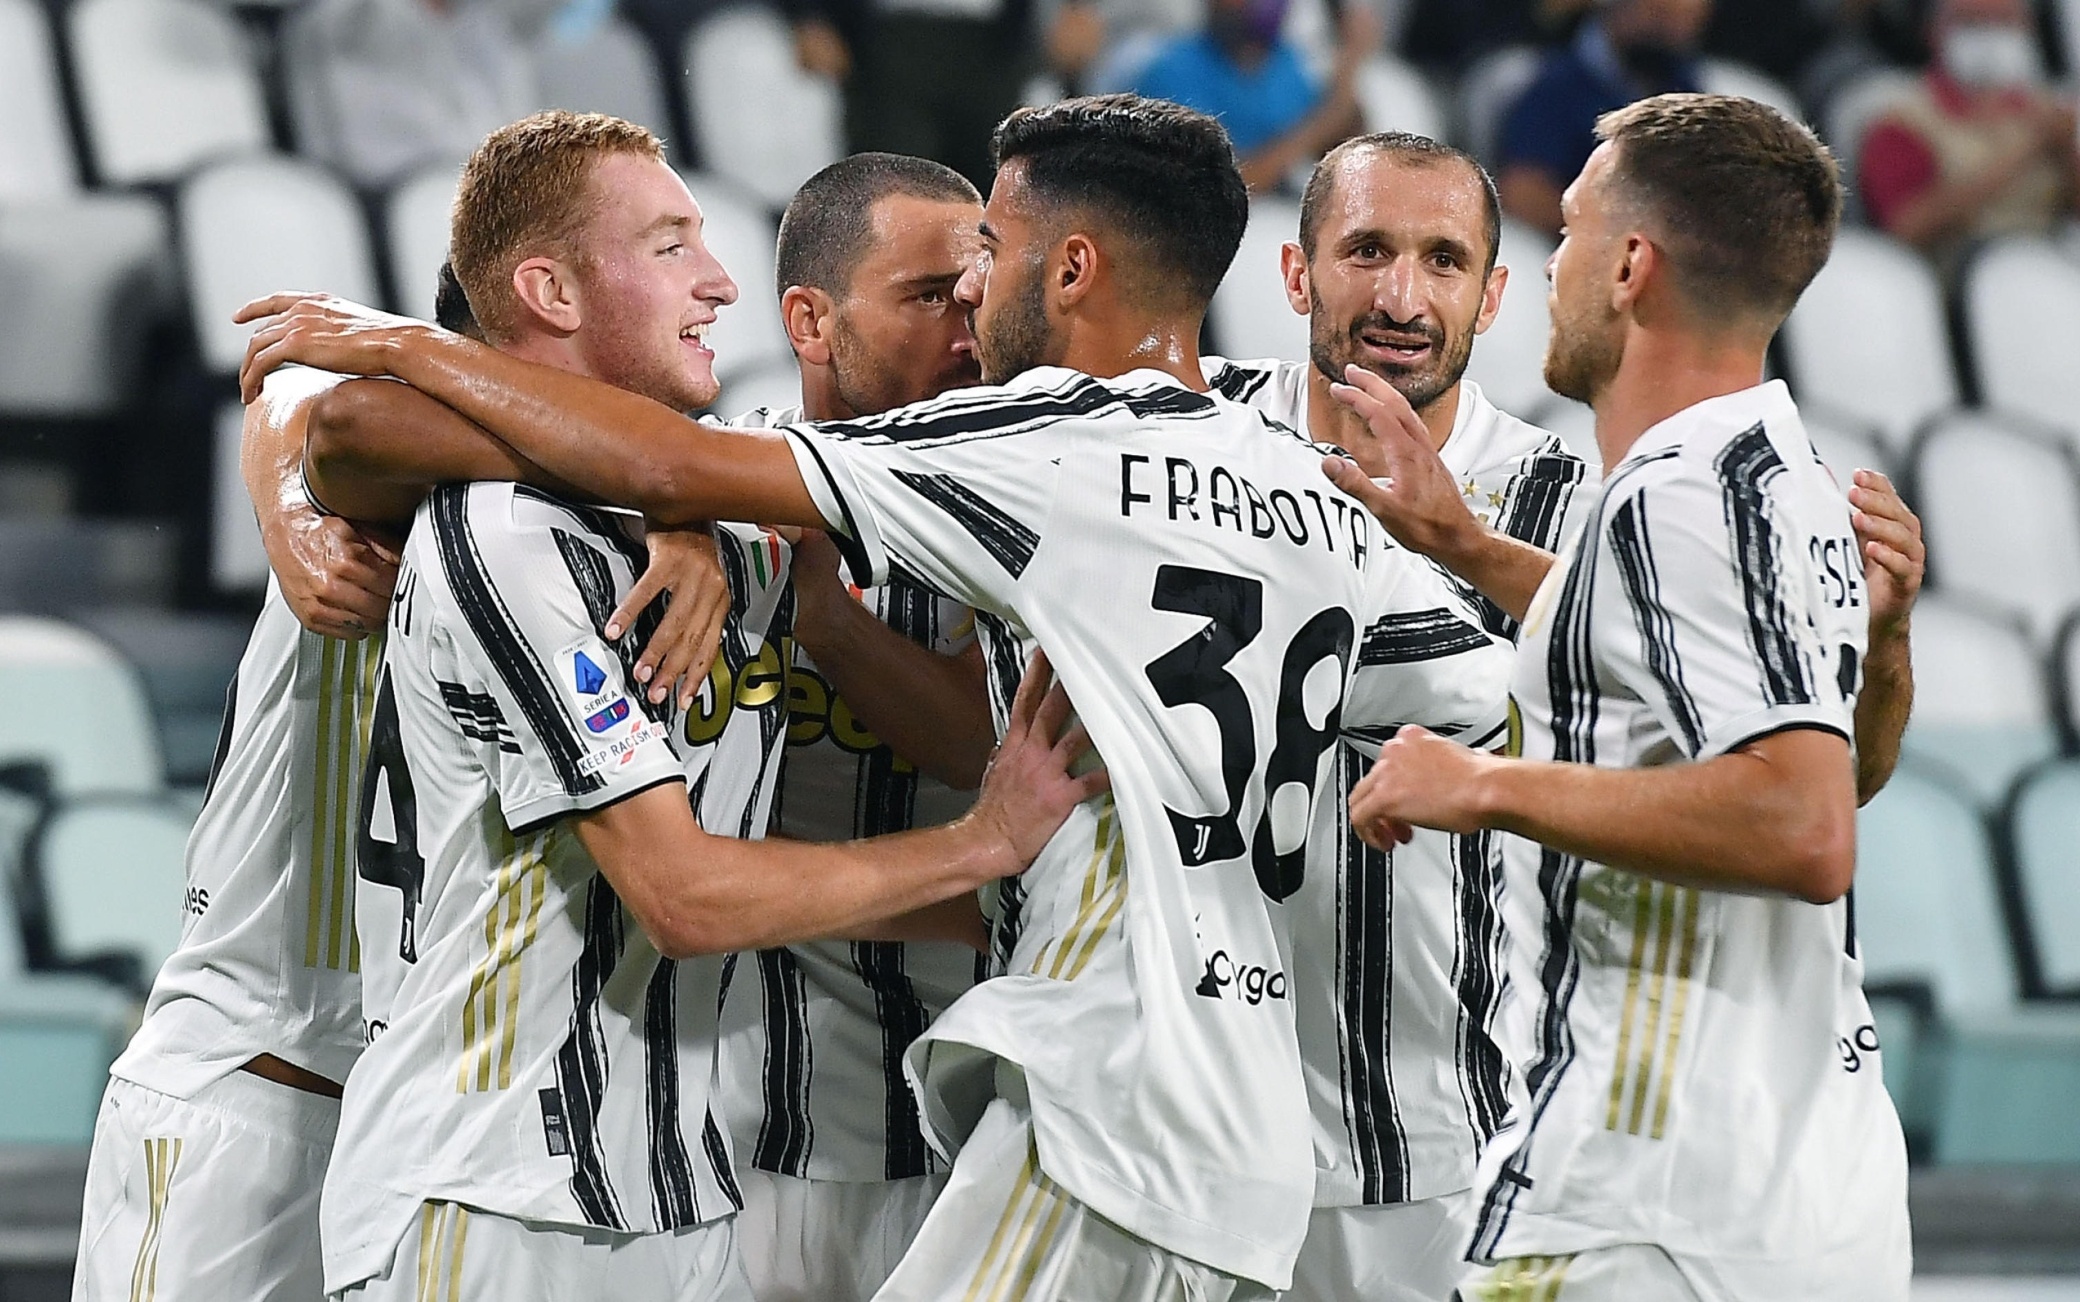 Juventus sent a clear warning to those who wish to break their Serie A domination as their crushed Sampdoria in their seasonal debut